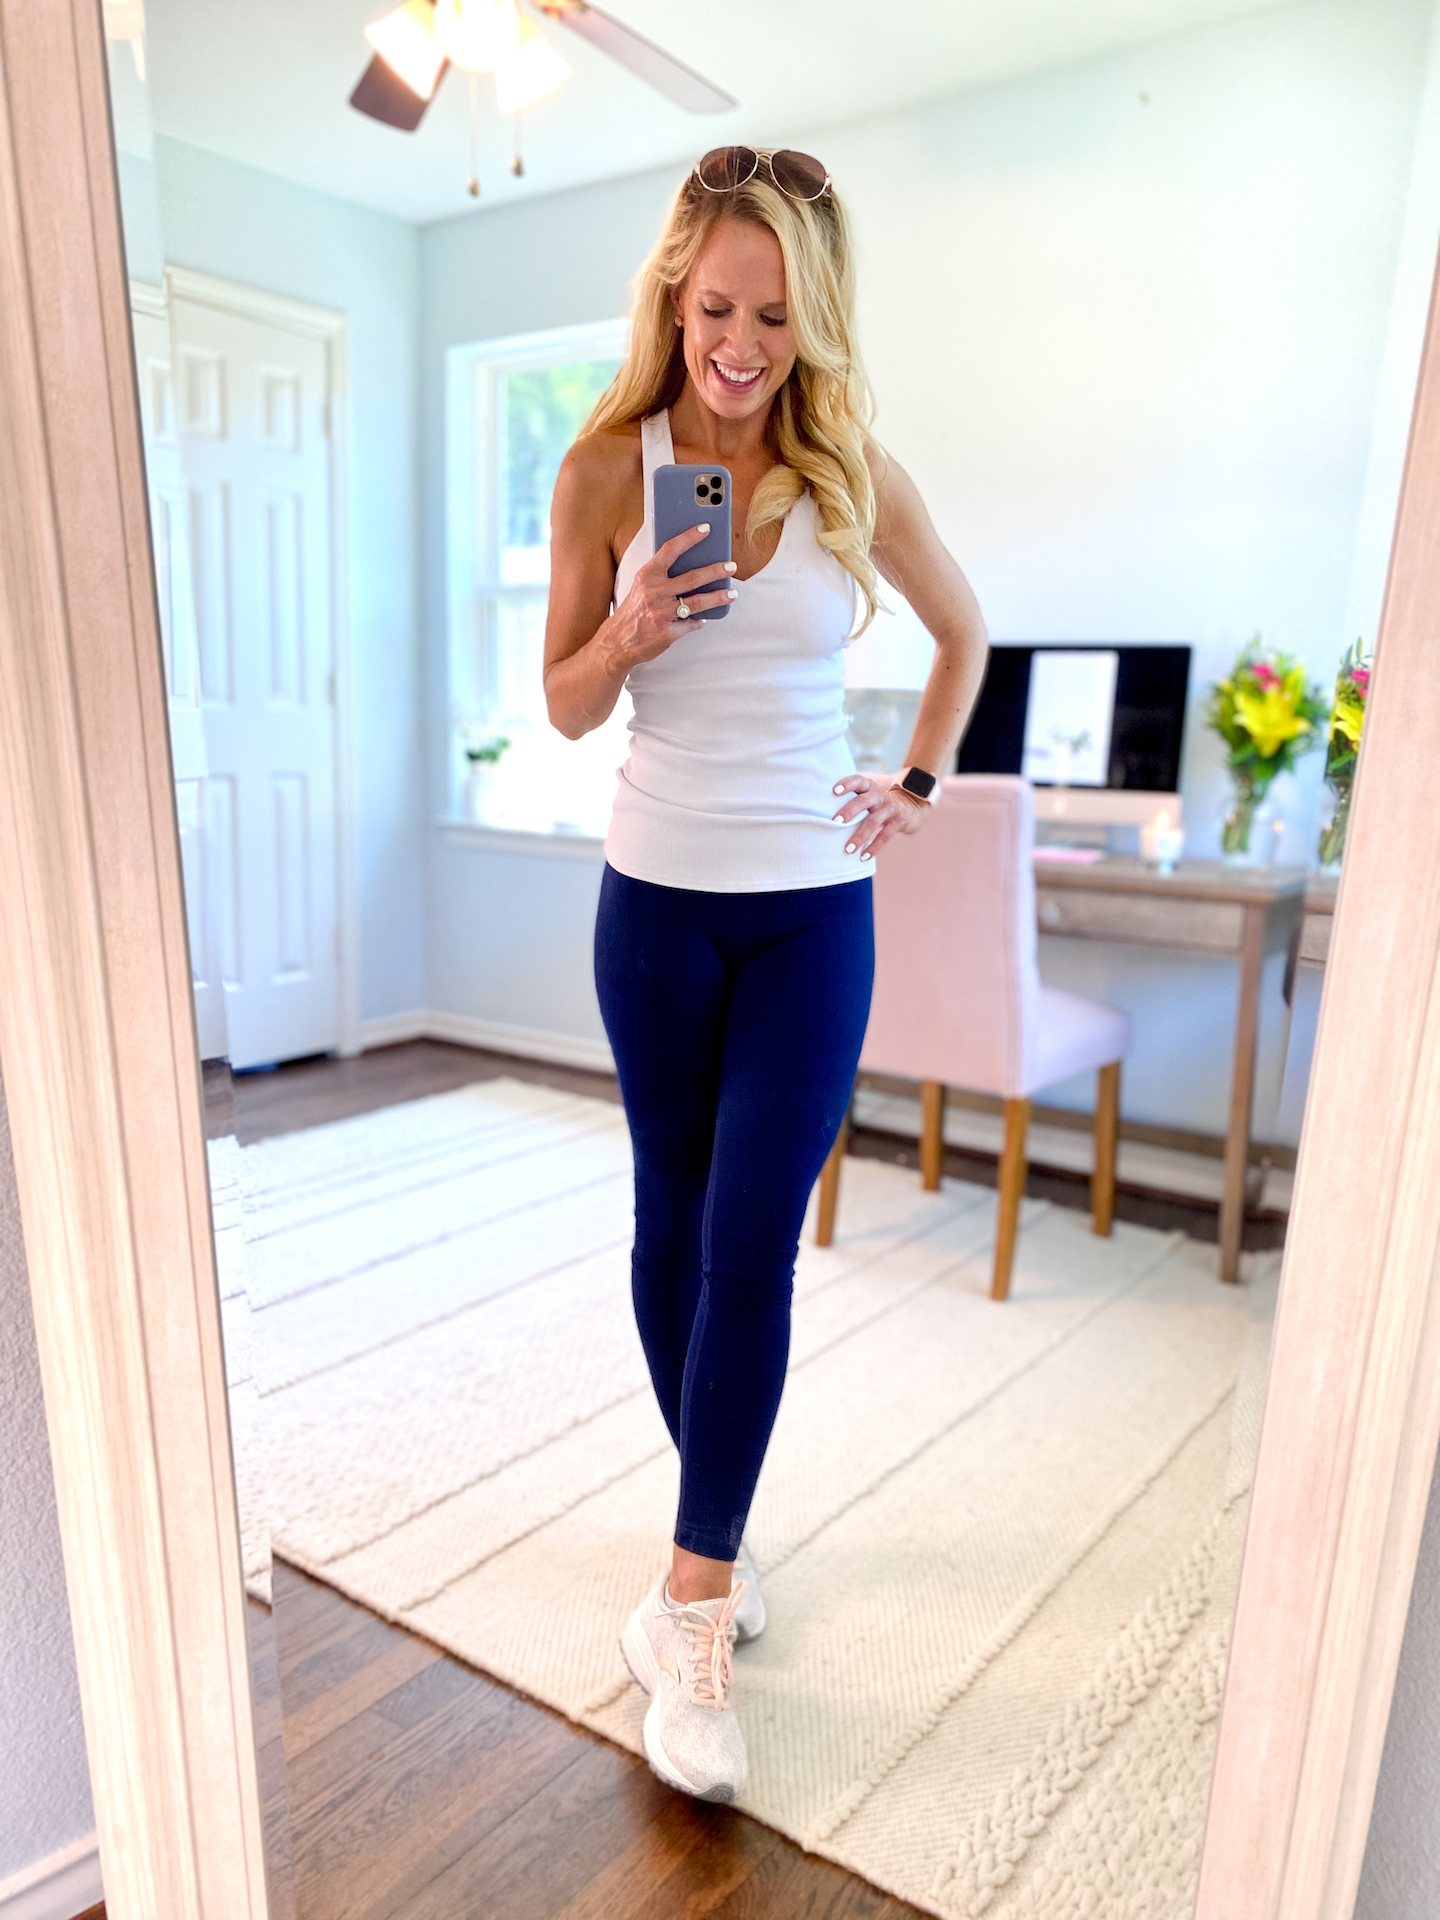 Favorite workout top and leggings in the Nordstrom Sale! Let’s get to the Women’s Nordstrom Anniversary Sale 2020 Shopping Guide!